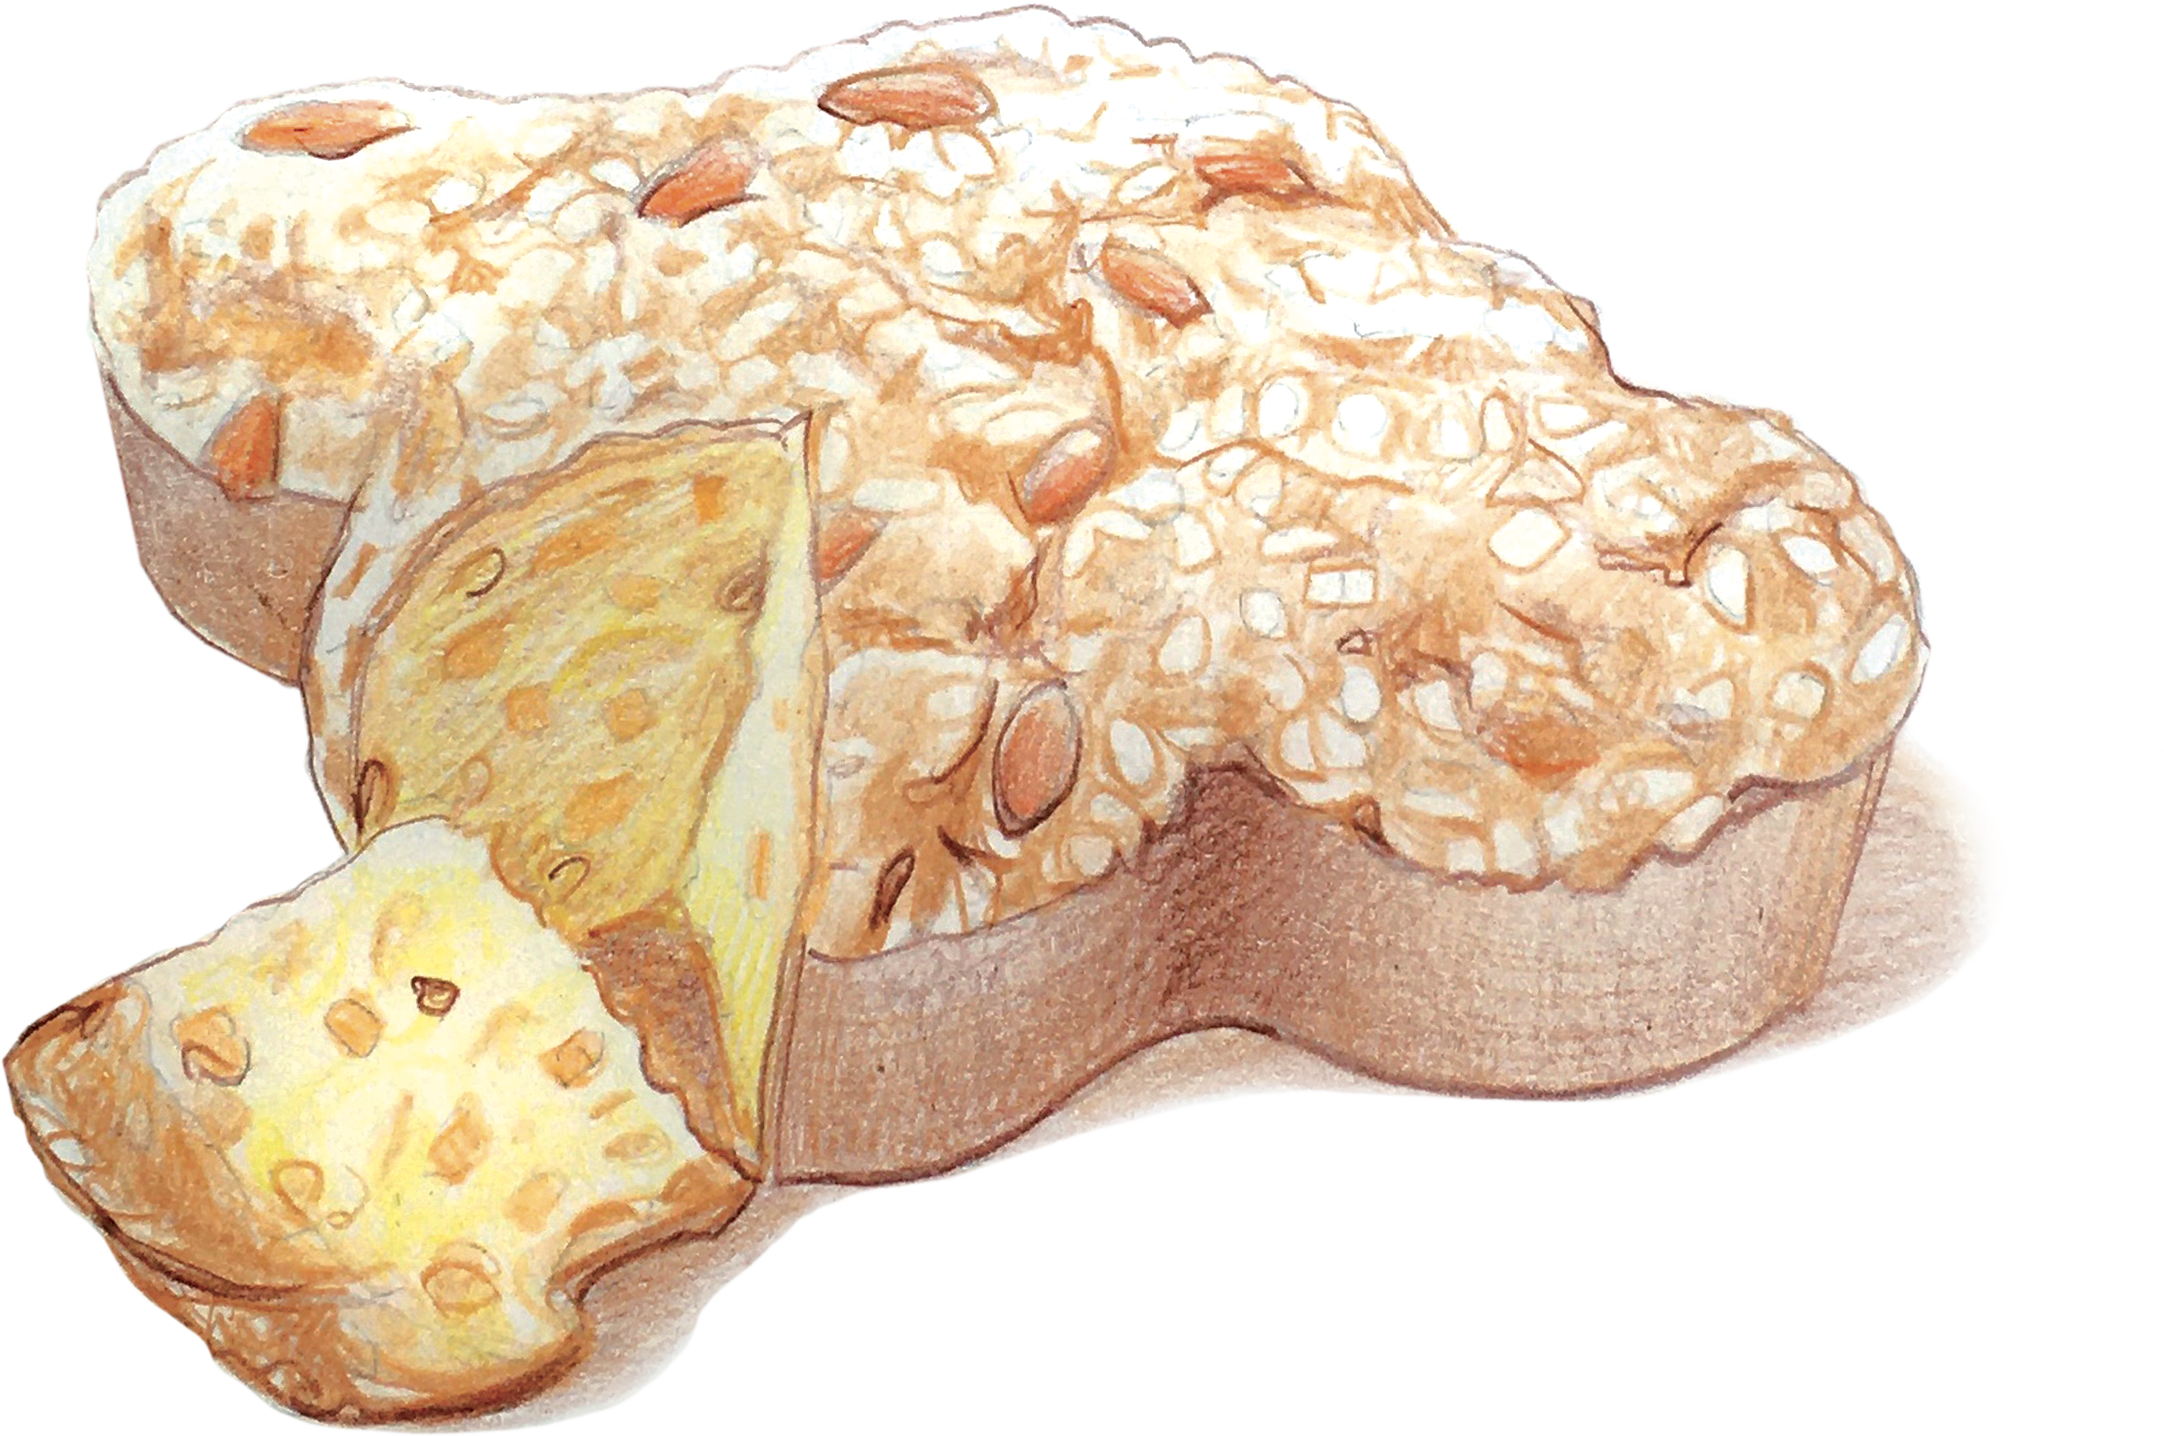 Colomba Cake: An Easy Italian Easter Cake Tradition - Cupcakes and Cutlery